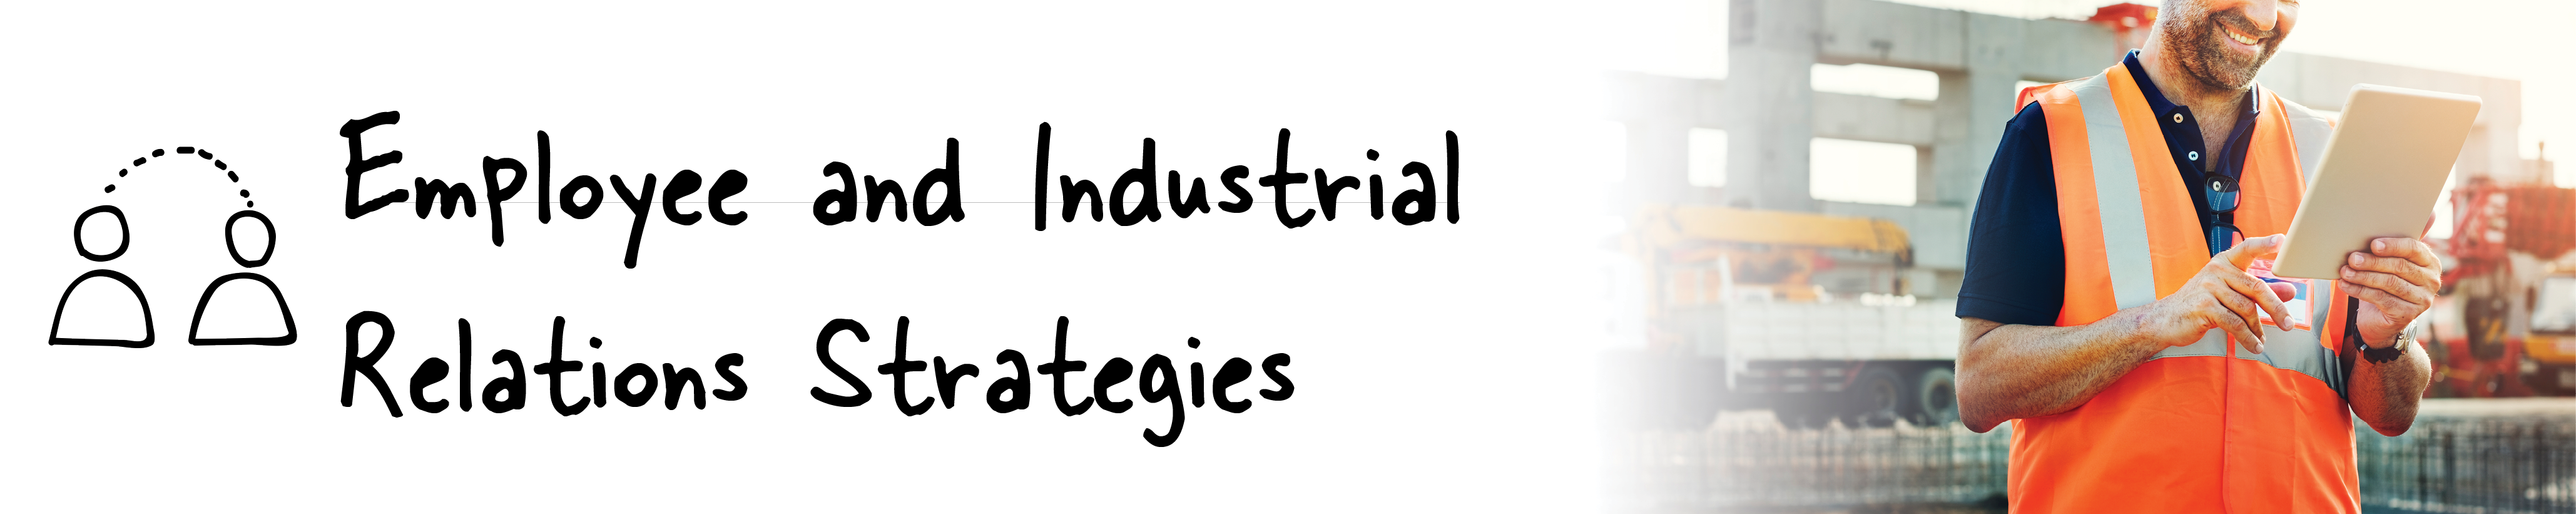 Employee and Industrial Relations Strategies